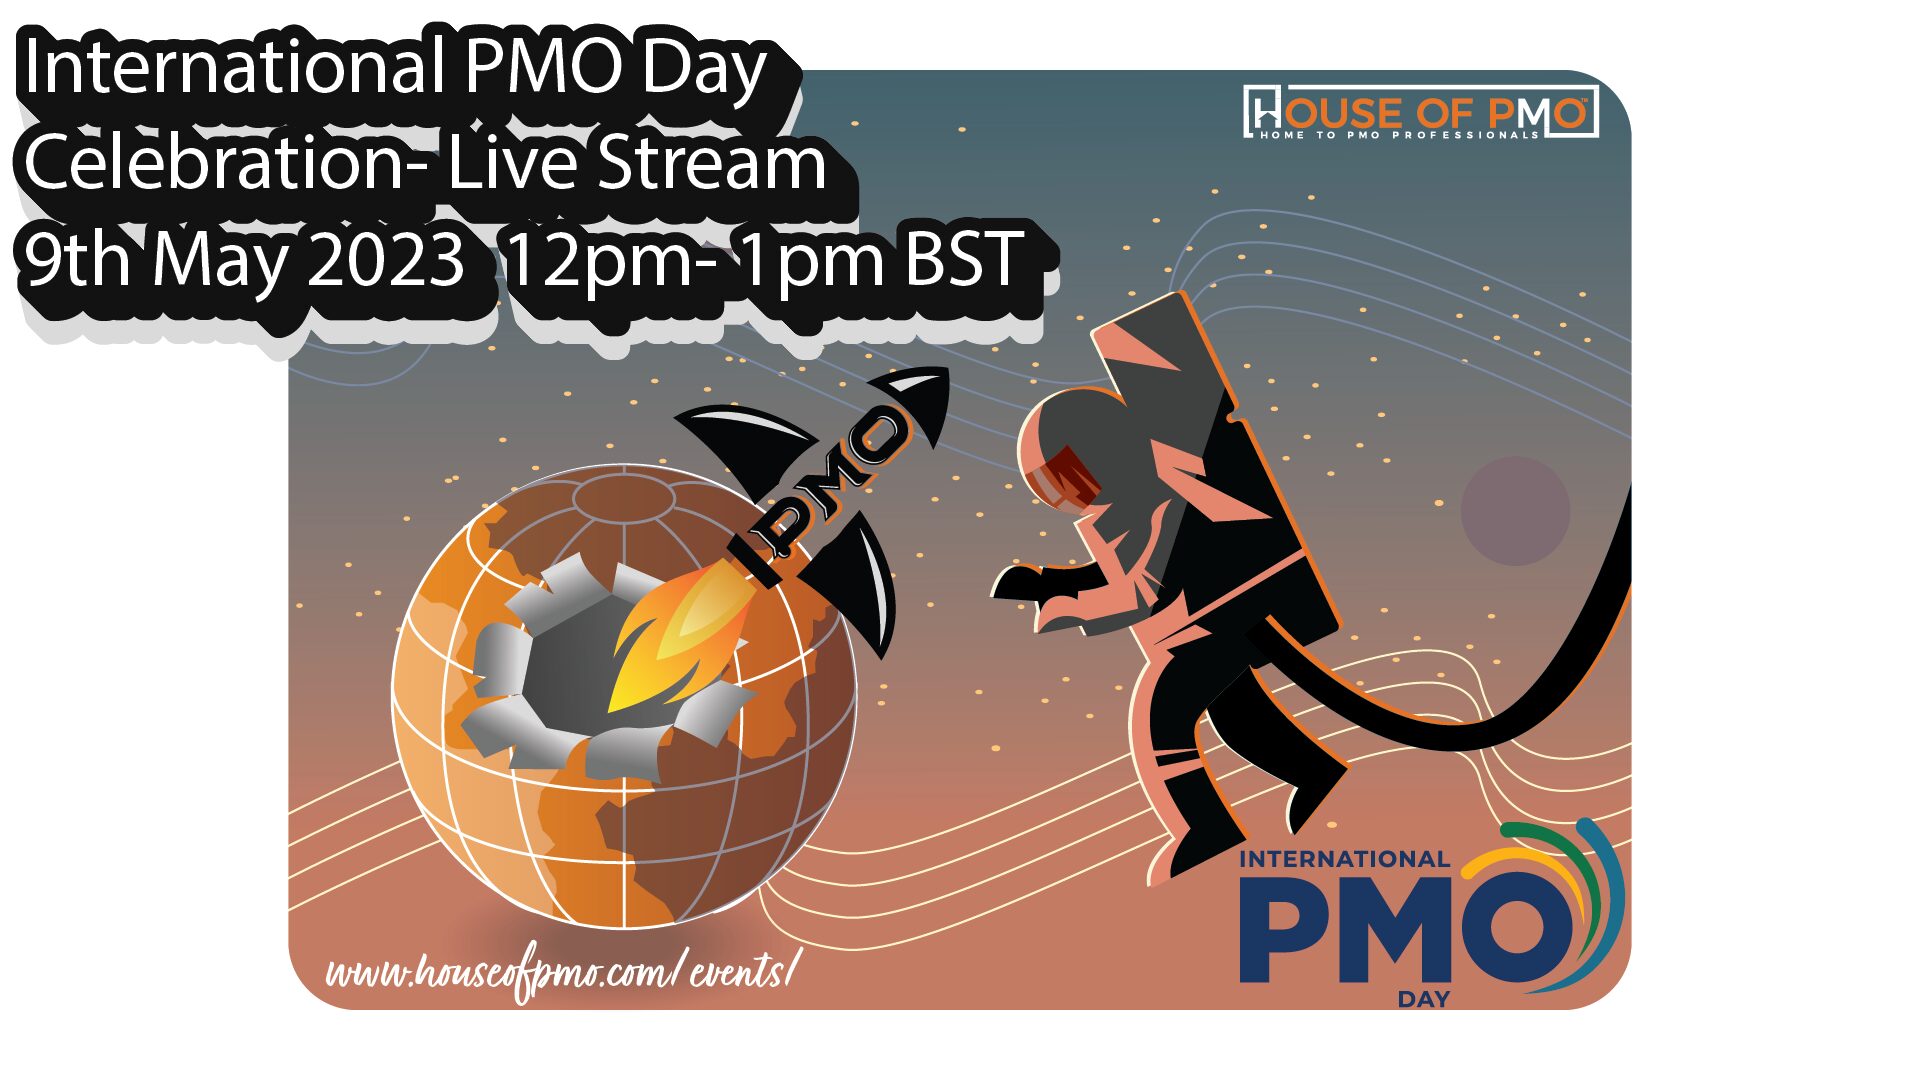 Image for International PMO Day Celebration Live Event Showing a PMO rocket bursting from earth